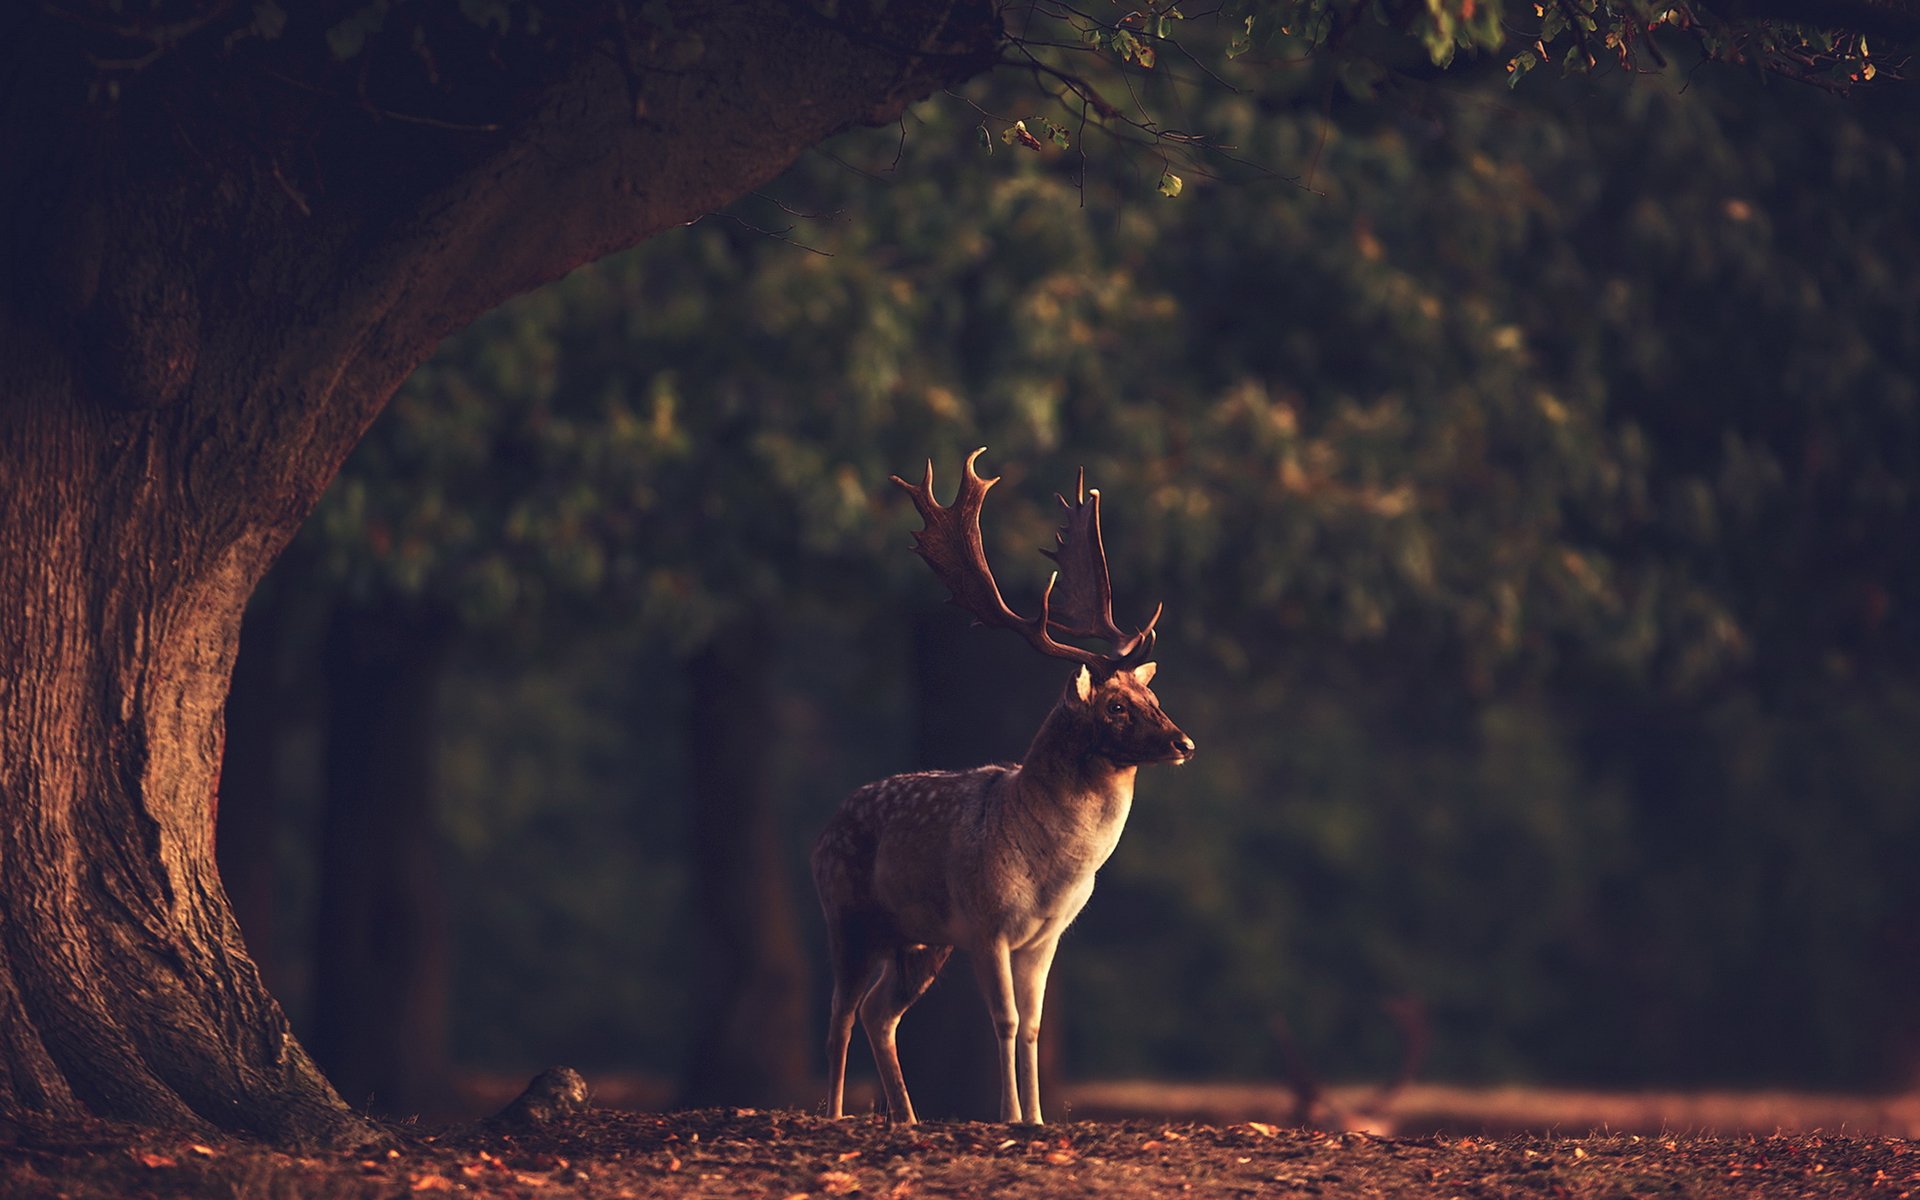 Professional photo with a deer in the forest